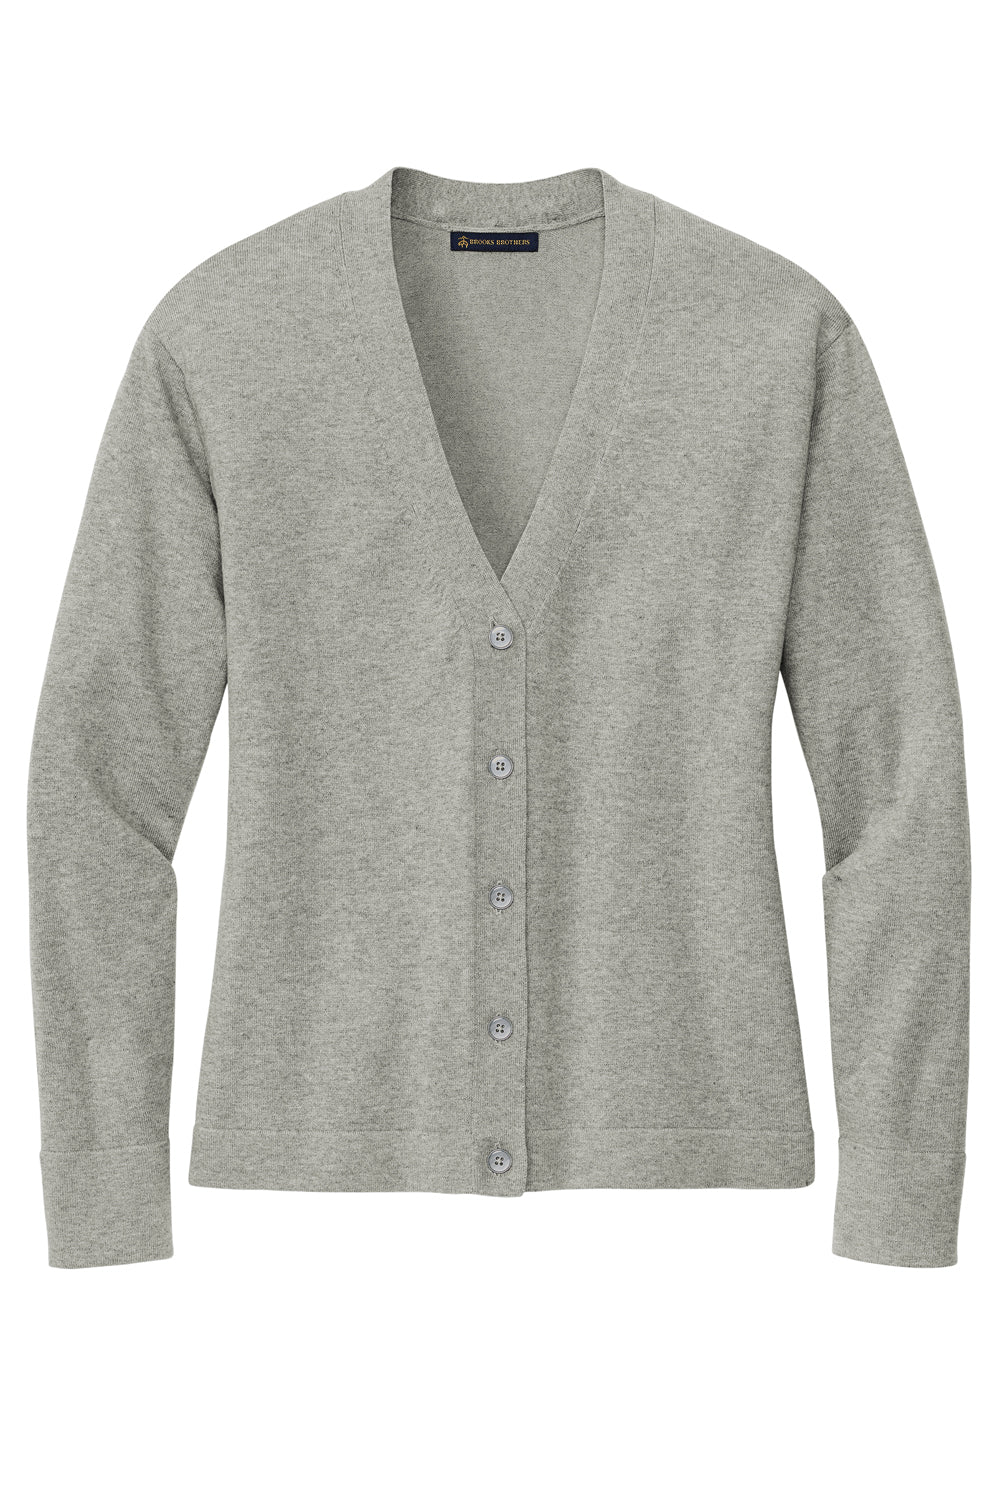 Brooks Brothers Womens Long Sleeeve Cardigan Sweater Heather Light Shadow Grey Flat Front